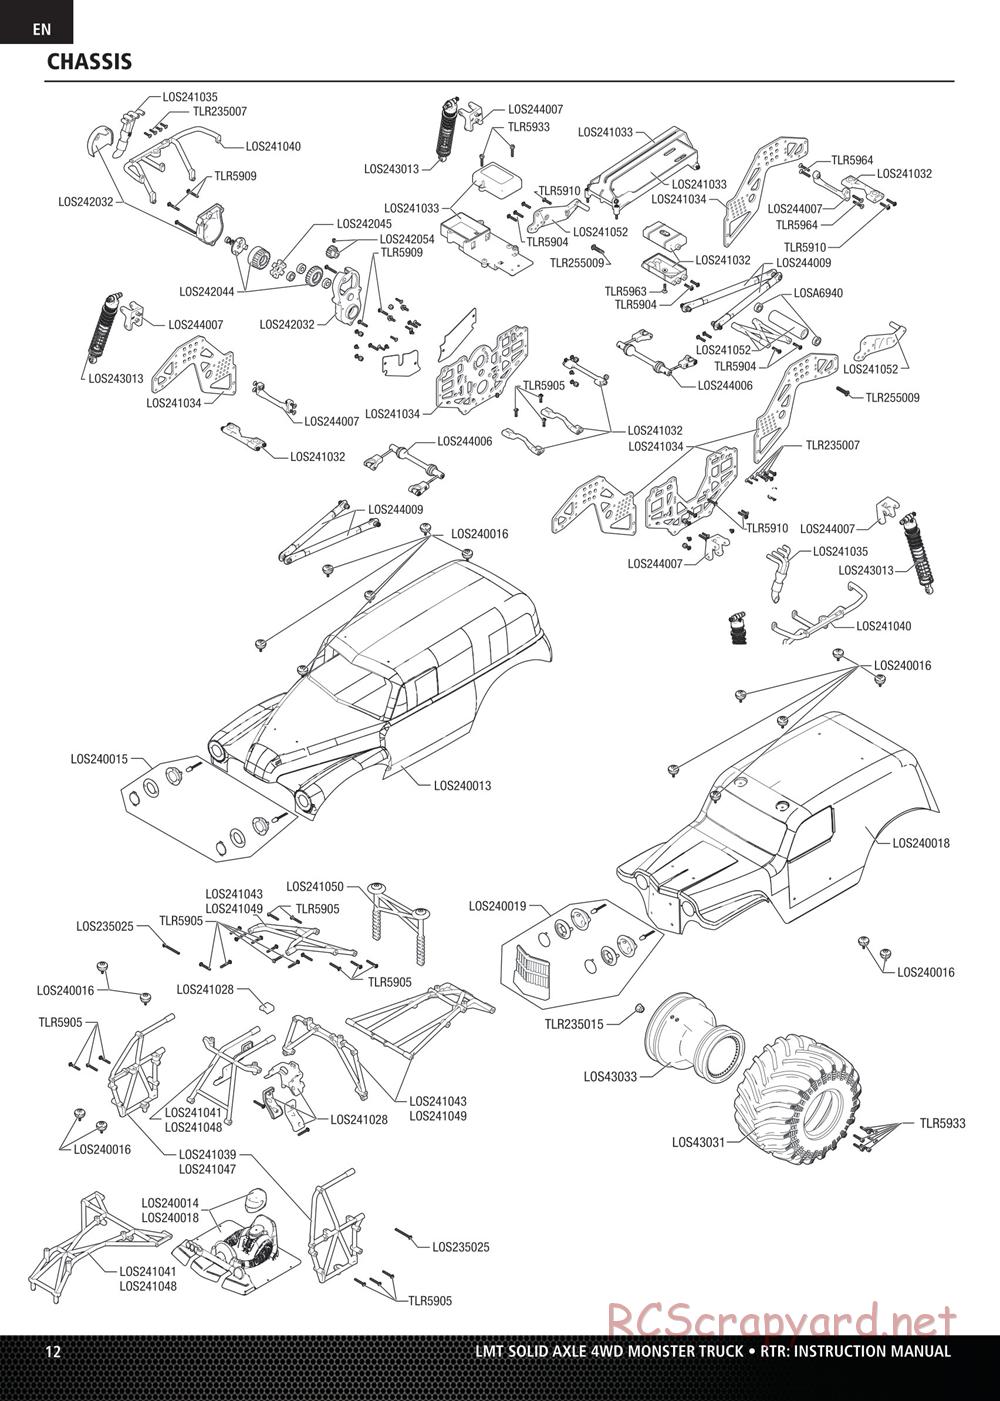 Team Losi - LMT Solid Axle Roller - Manual - Page 12